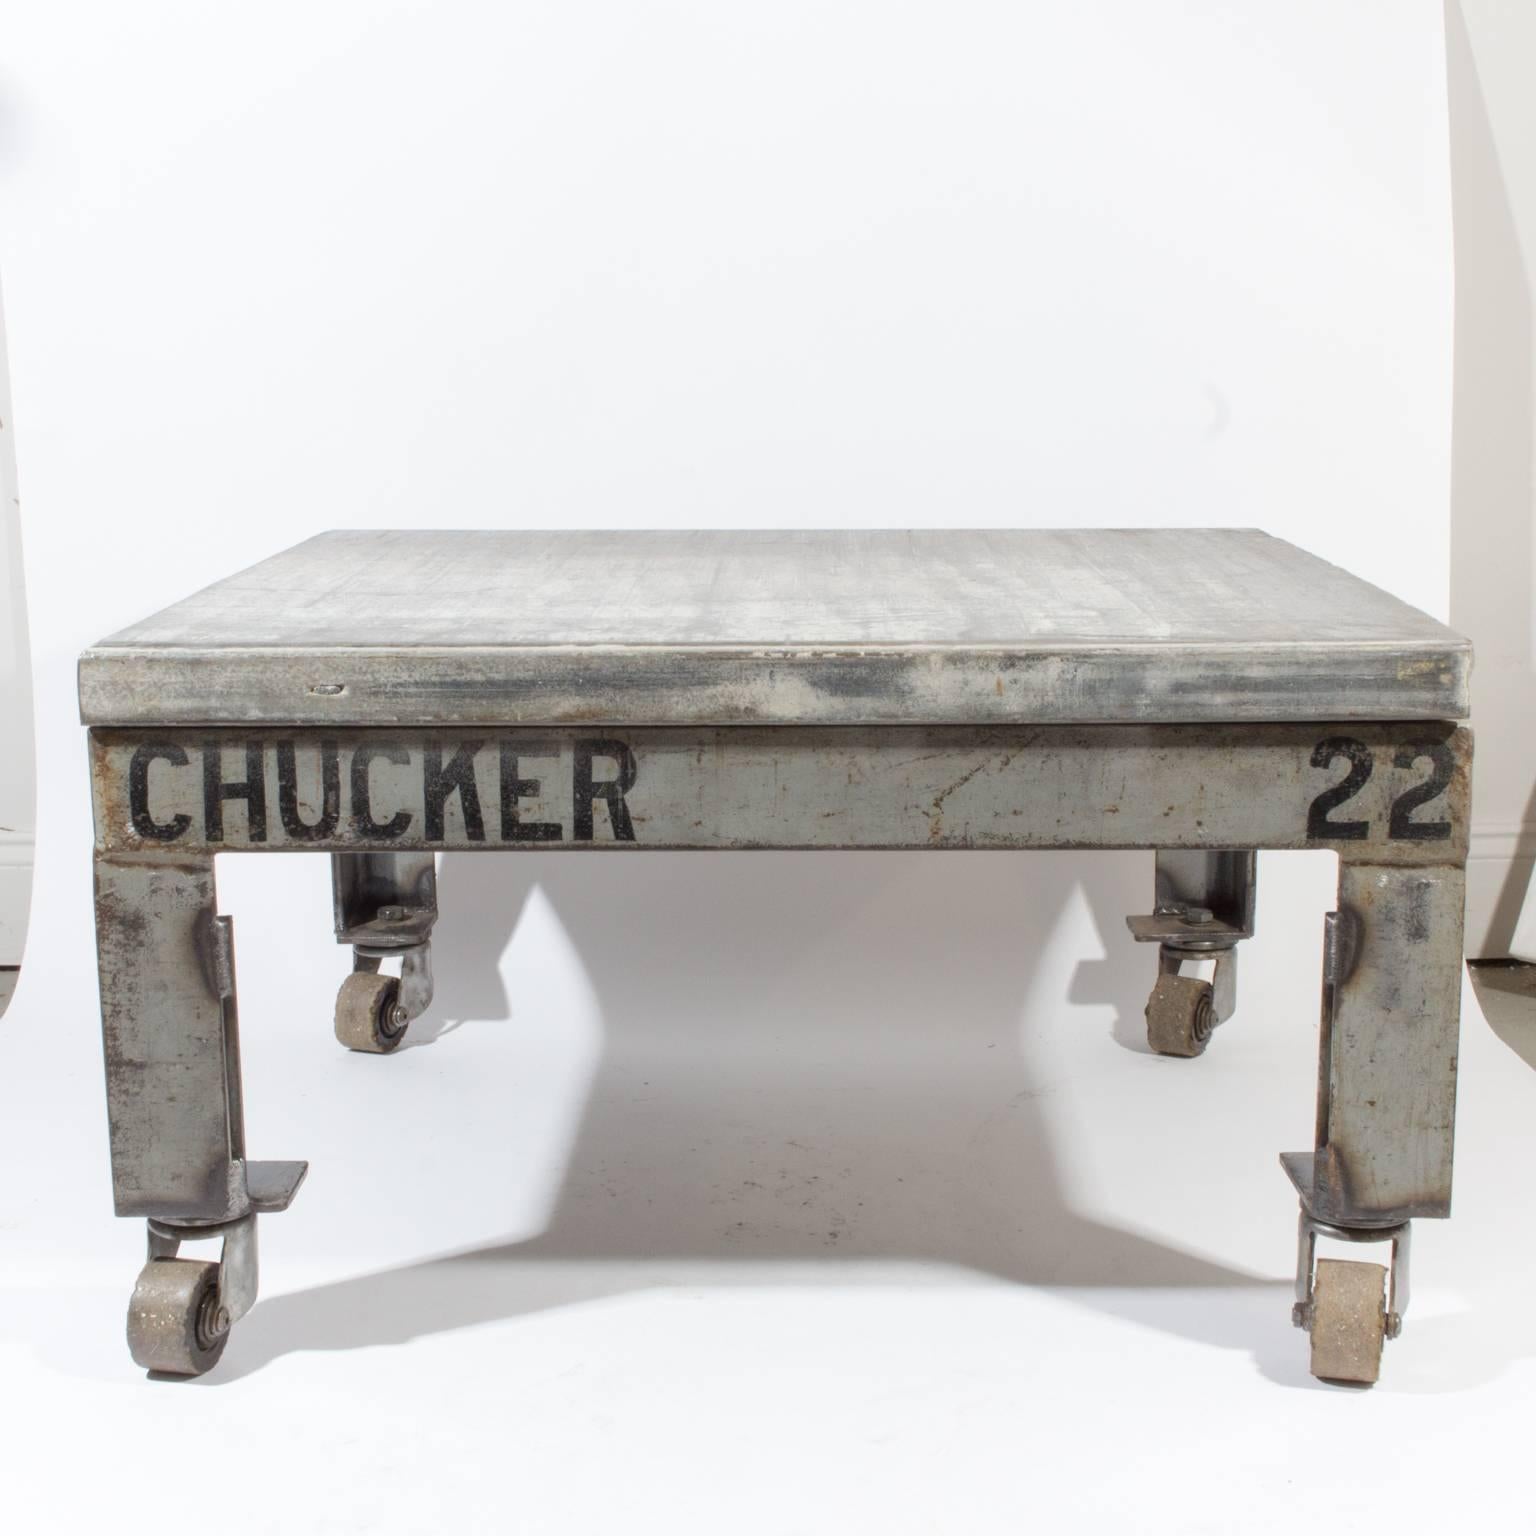 A unique Industrial Design, this cocktail table is crafted from a vintage Belgian bricklayer's pallet and includes four wheels. We like the original writing featured on two sides with chucker 22. Measures 32.25 inches by 31.5 with height at 18